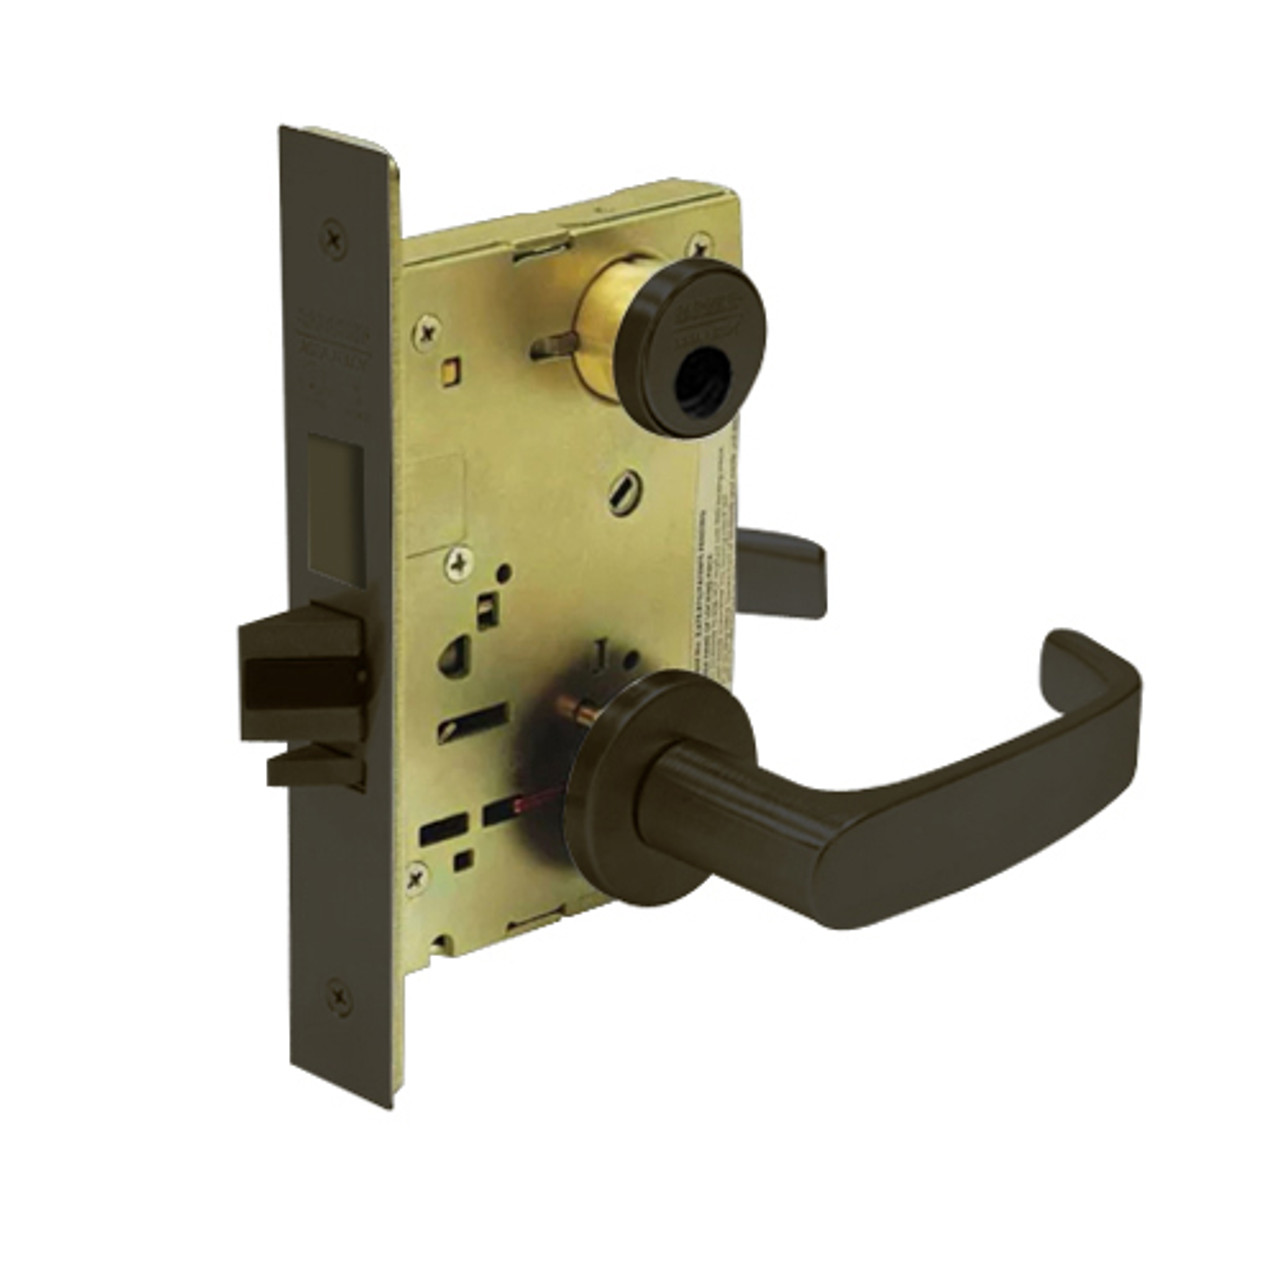 LC-8249-LNL-10B Sargent 8200 Series Security Deadbolt Mortise Lock with LNL Lever Trim Less Cylinder in Oxidized Dull Bronze